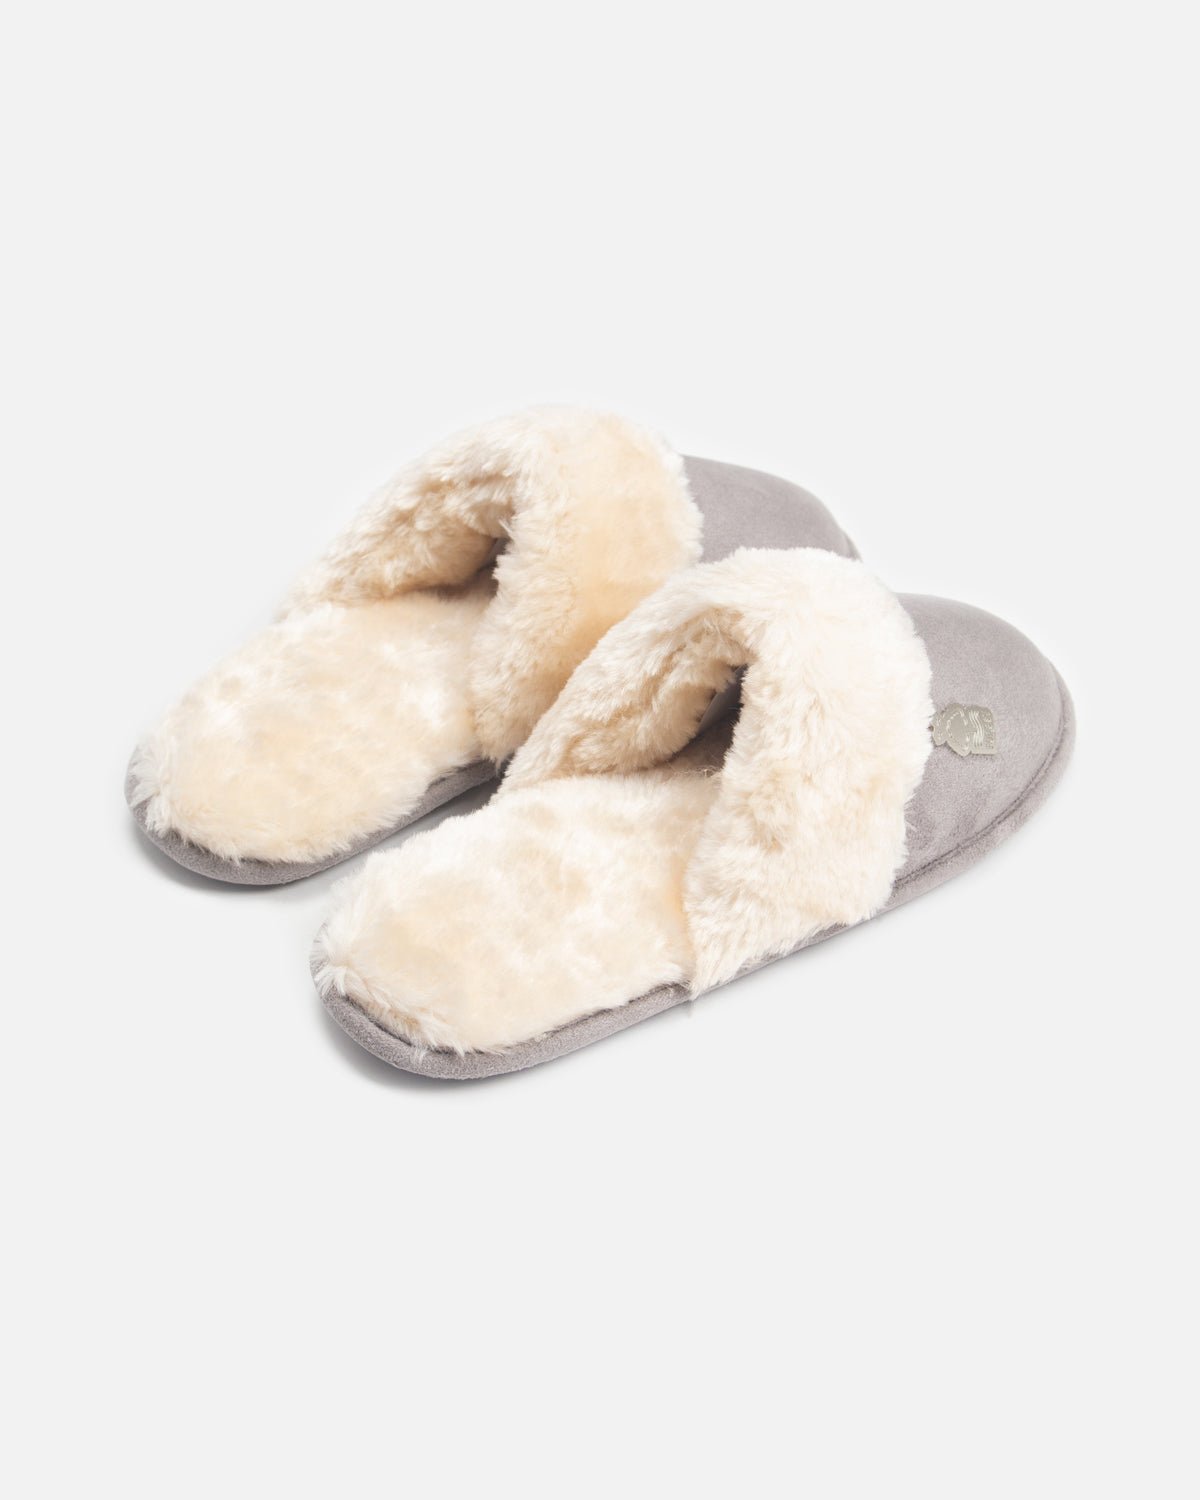 NFFC Women's Grey Fur Lined Slippers - Nottingham Forest FC